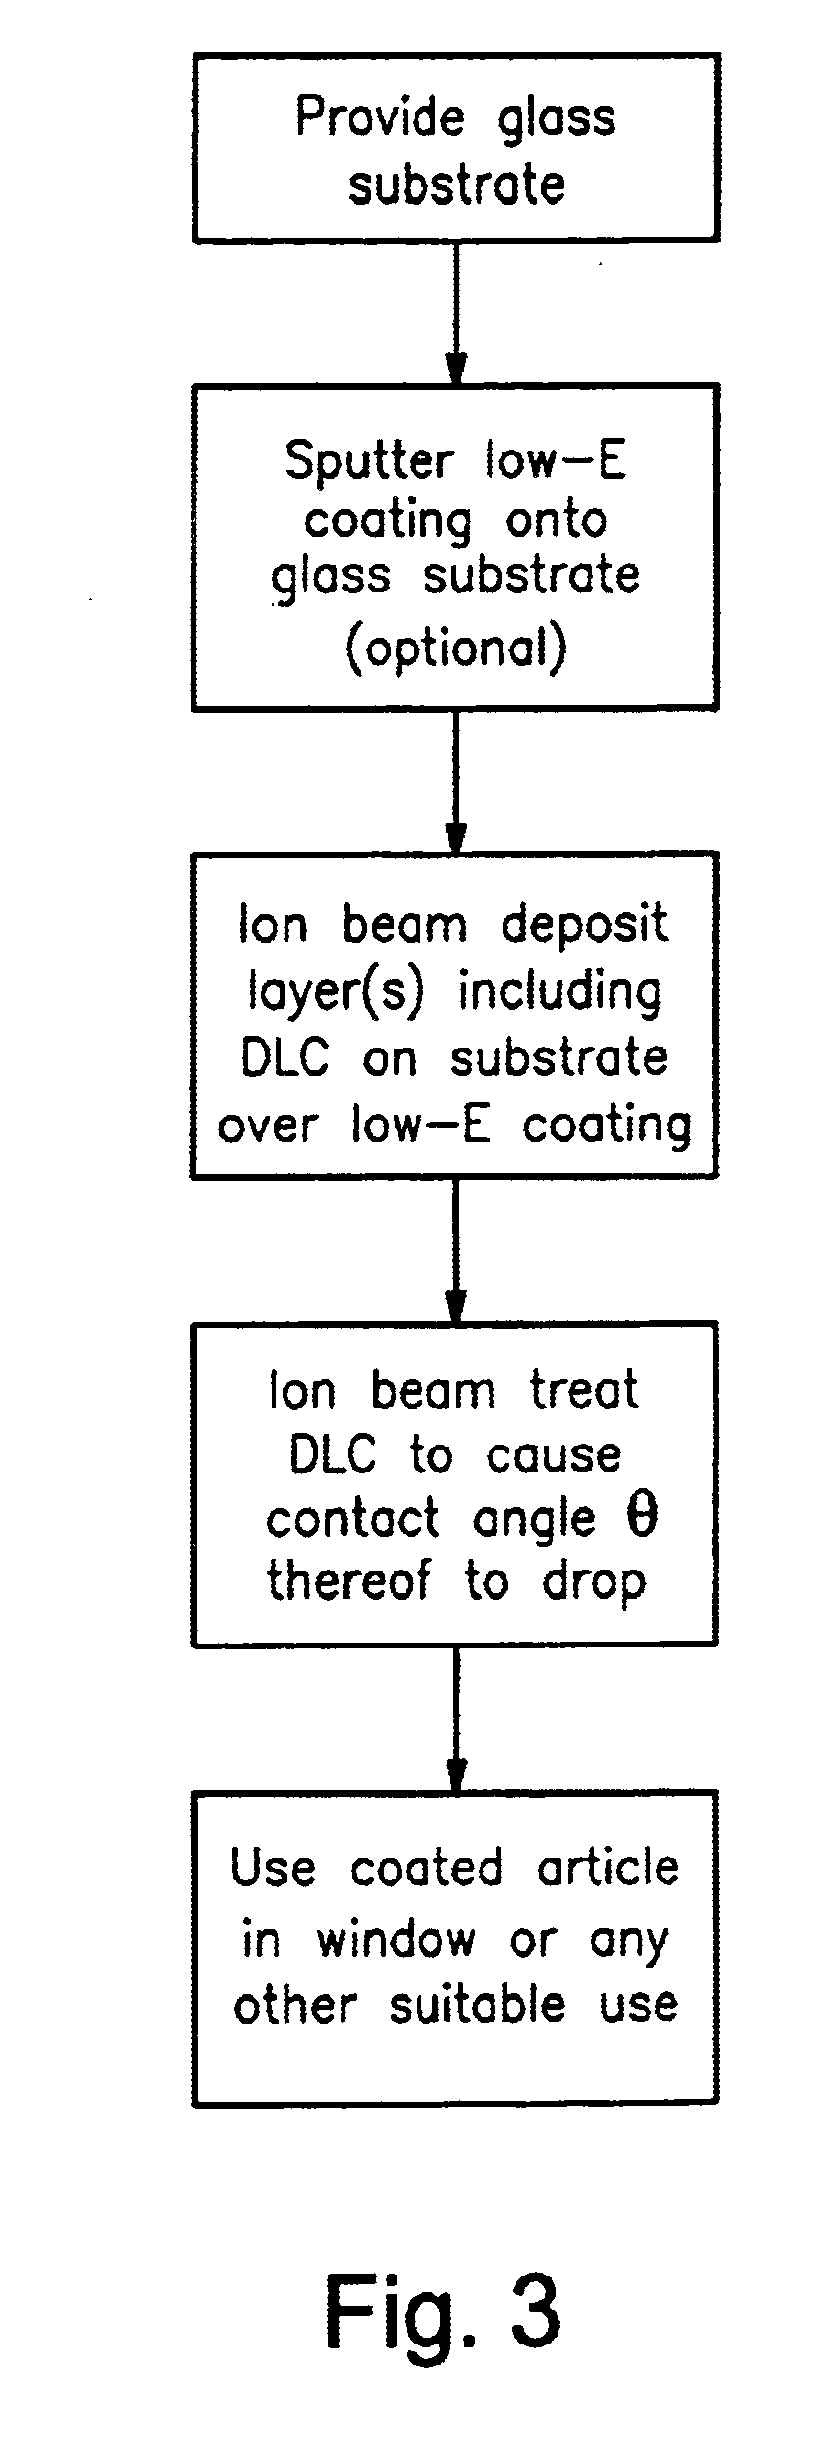 Method of ion beam treatment of DLC in order to reduce contact angle